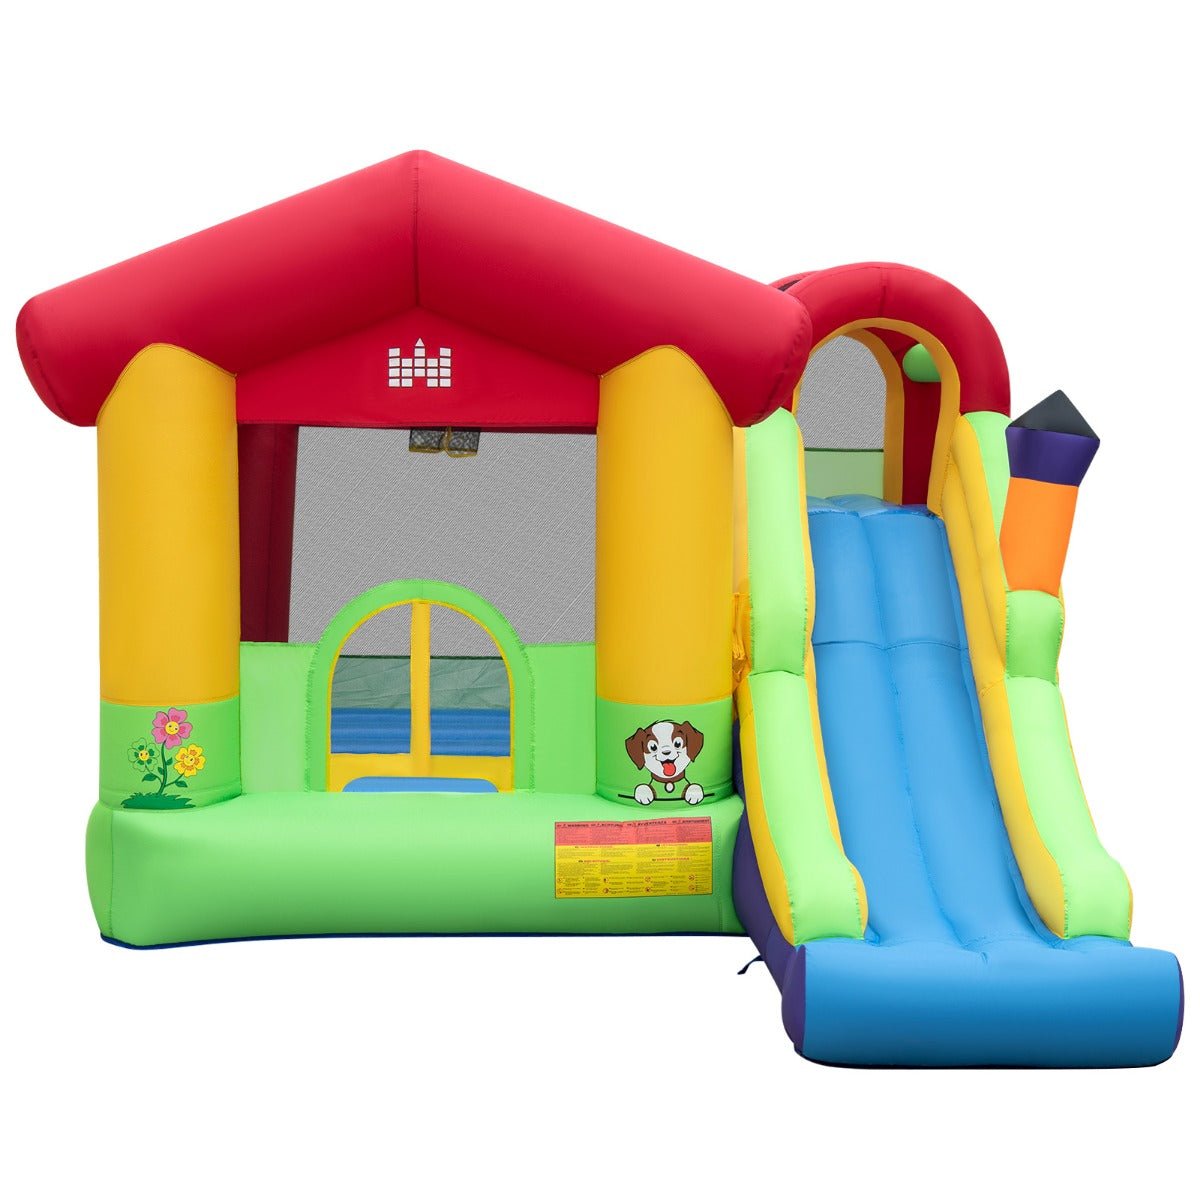 Outdoor Thrills: Jumping Castle for Kids with Climbing Wall